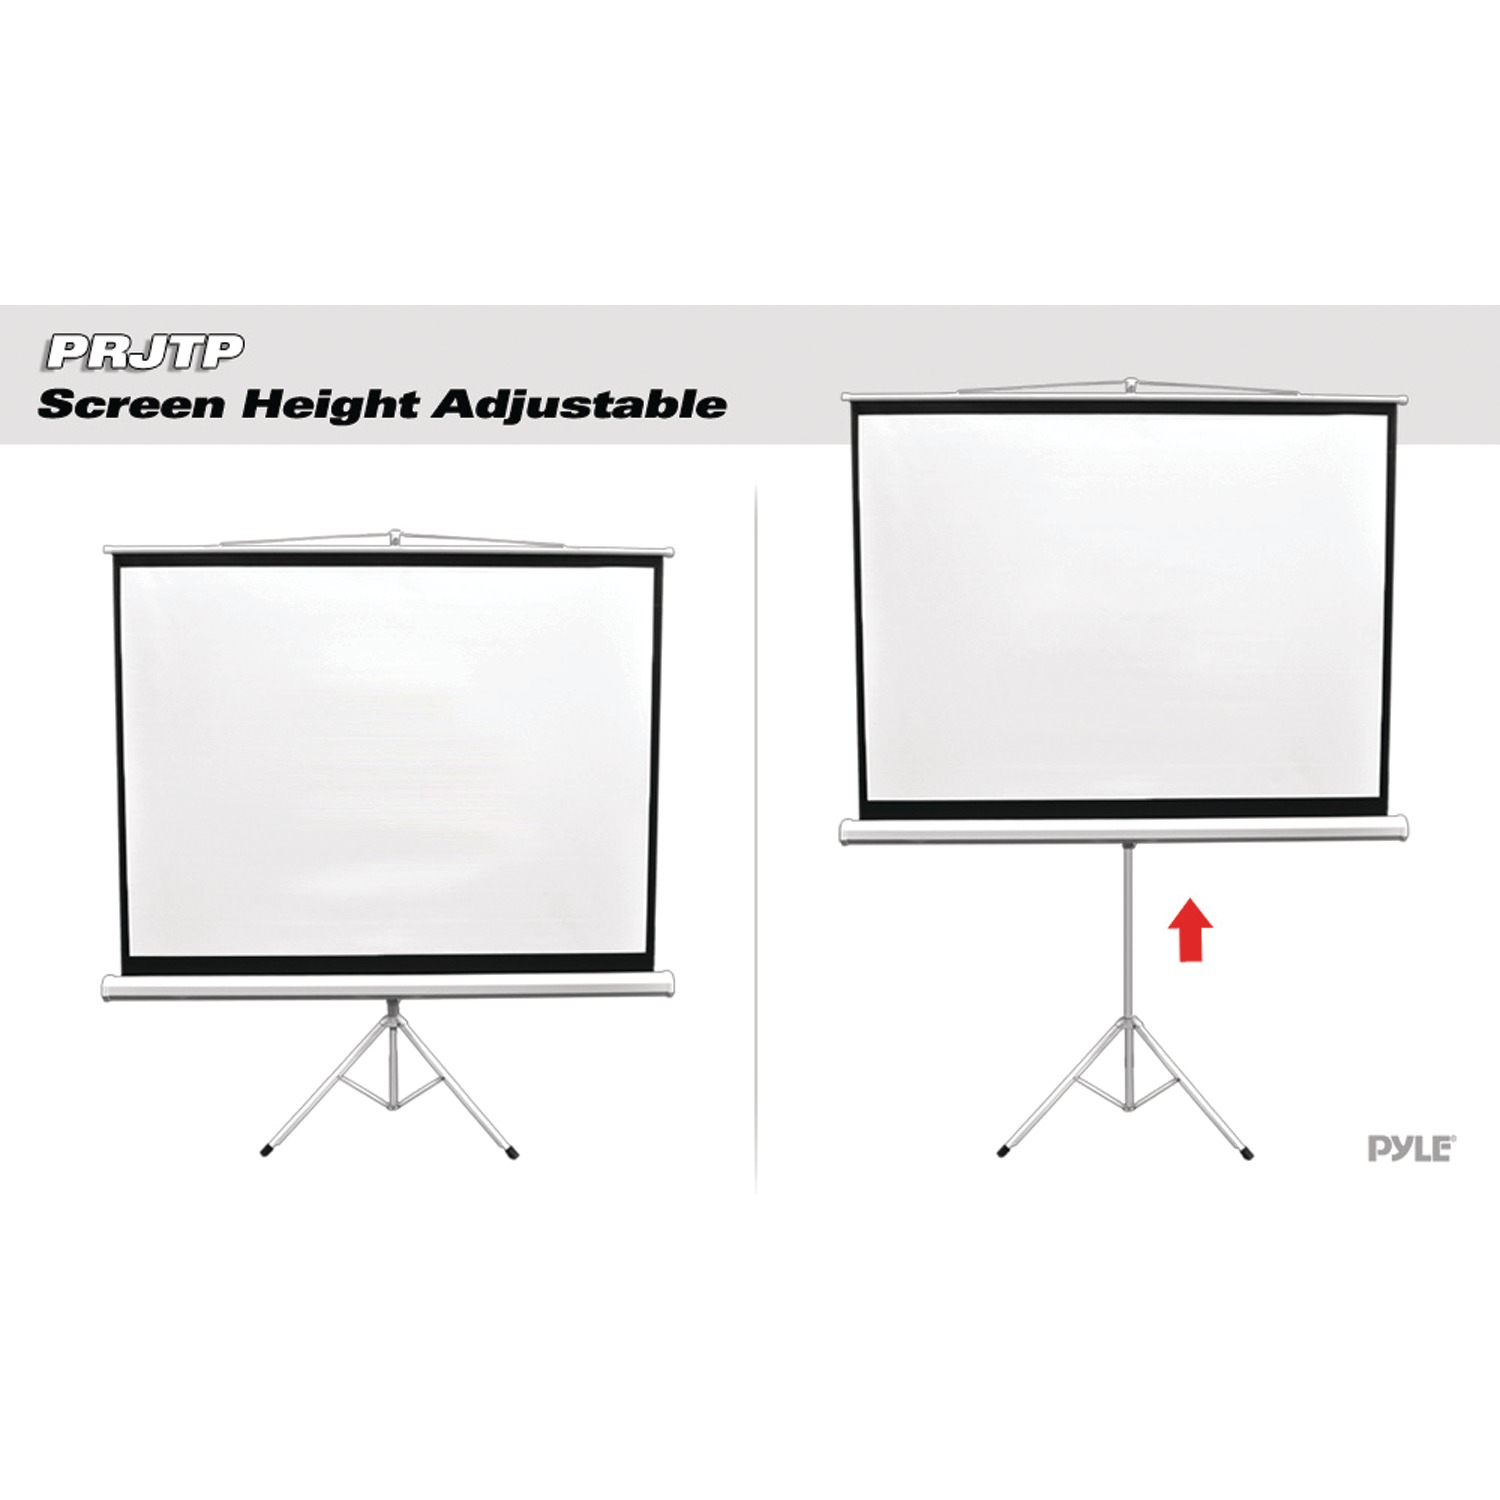 Pyle® Floor-standing Portable Tr Manual Projector Screen (84-inch) - image 4 of 5